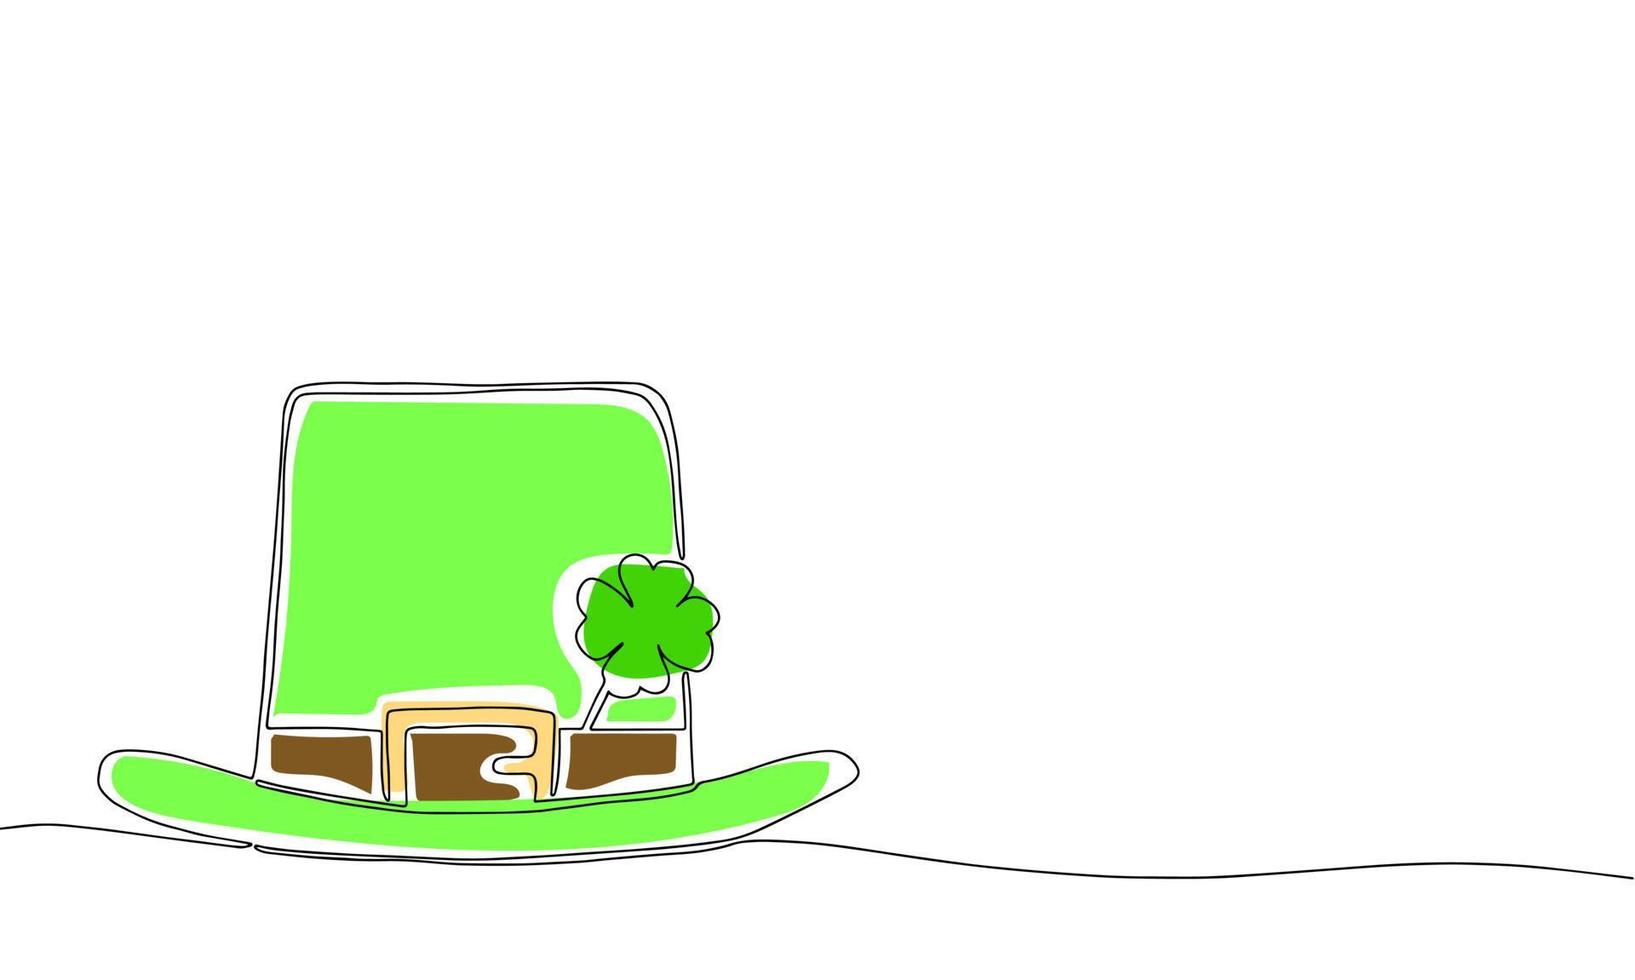 Leprechaun's hat. Line art illustration with color. Outline, one continuous vector illustration. St. Patrick's Day. 17 March. Good luck.